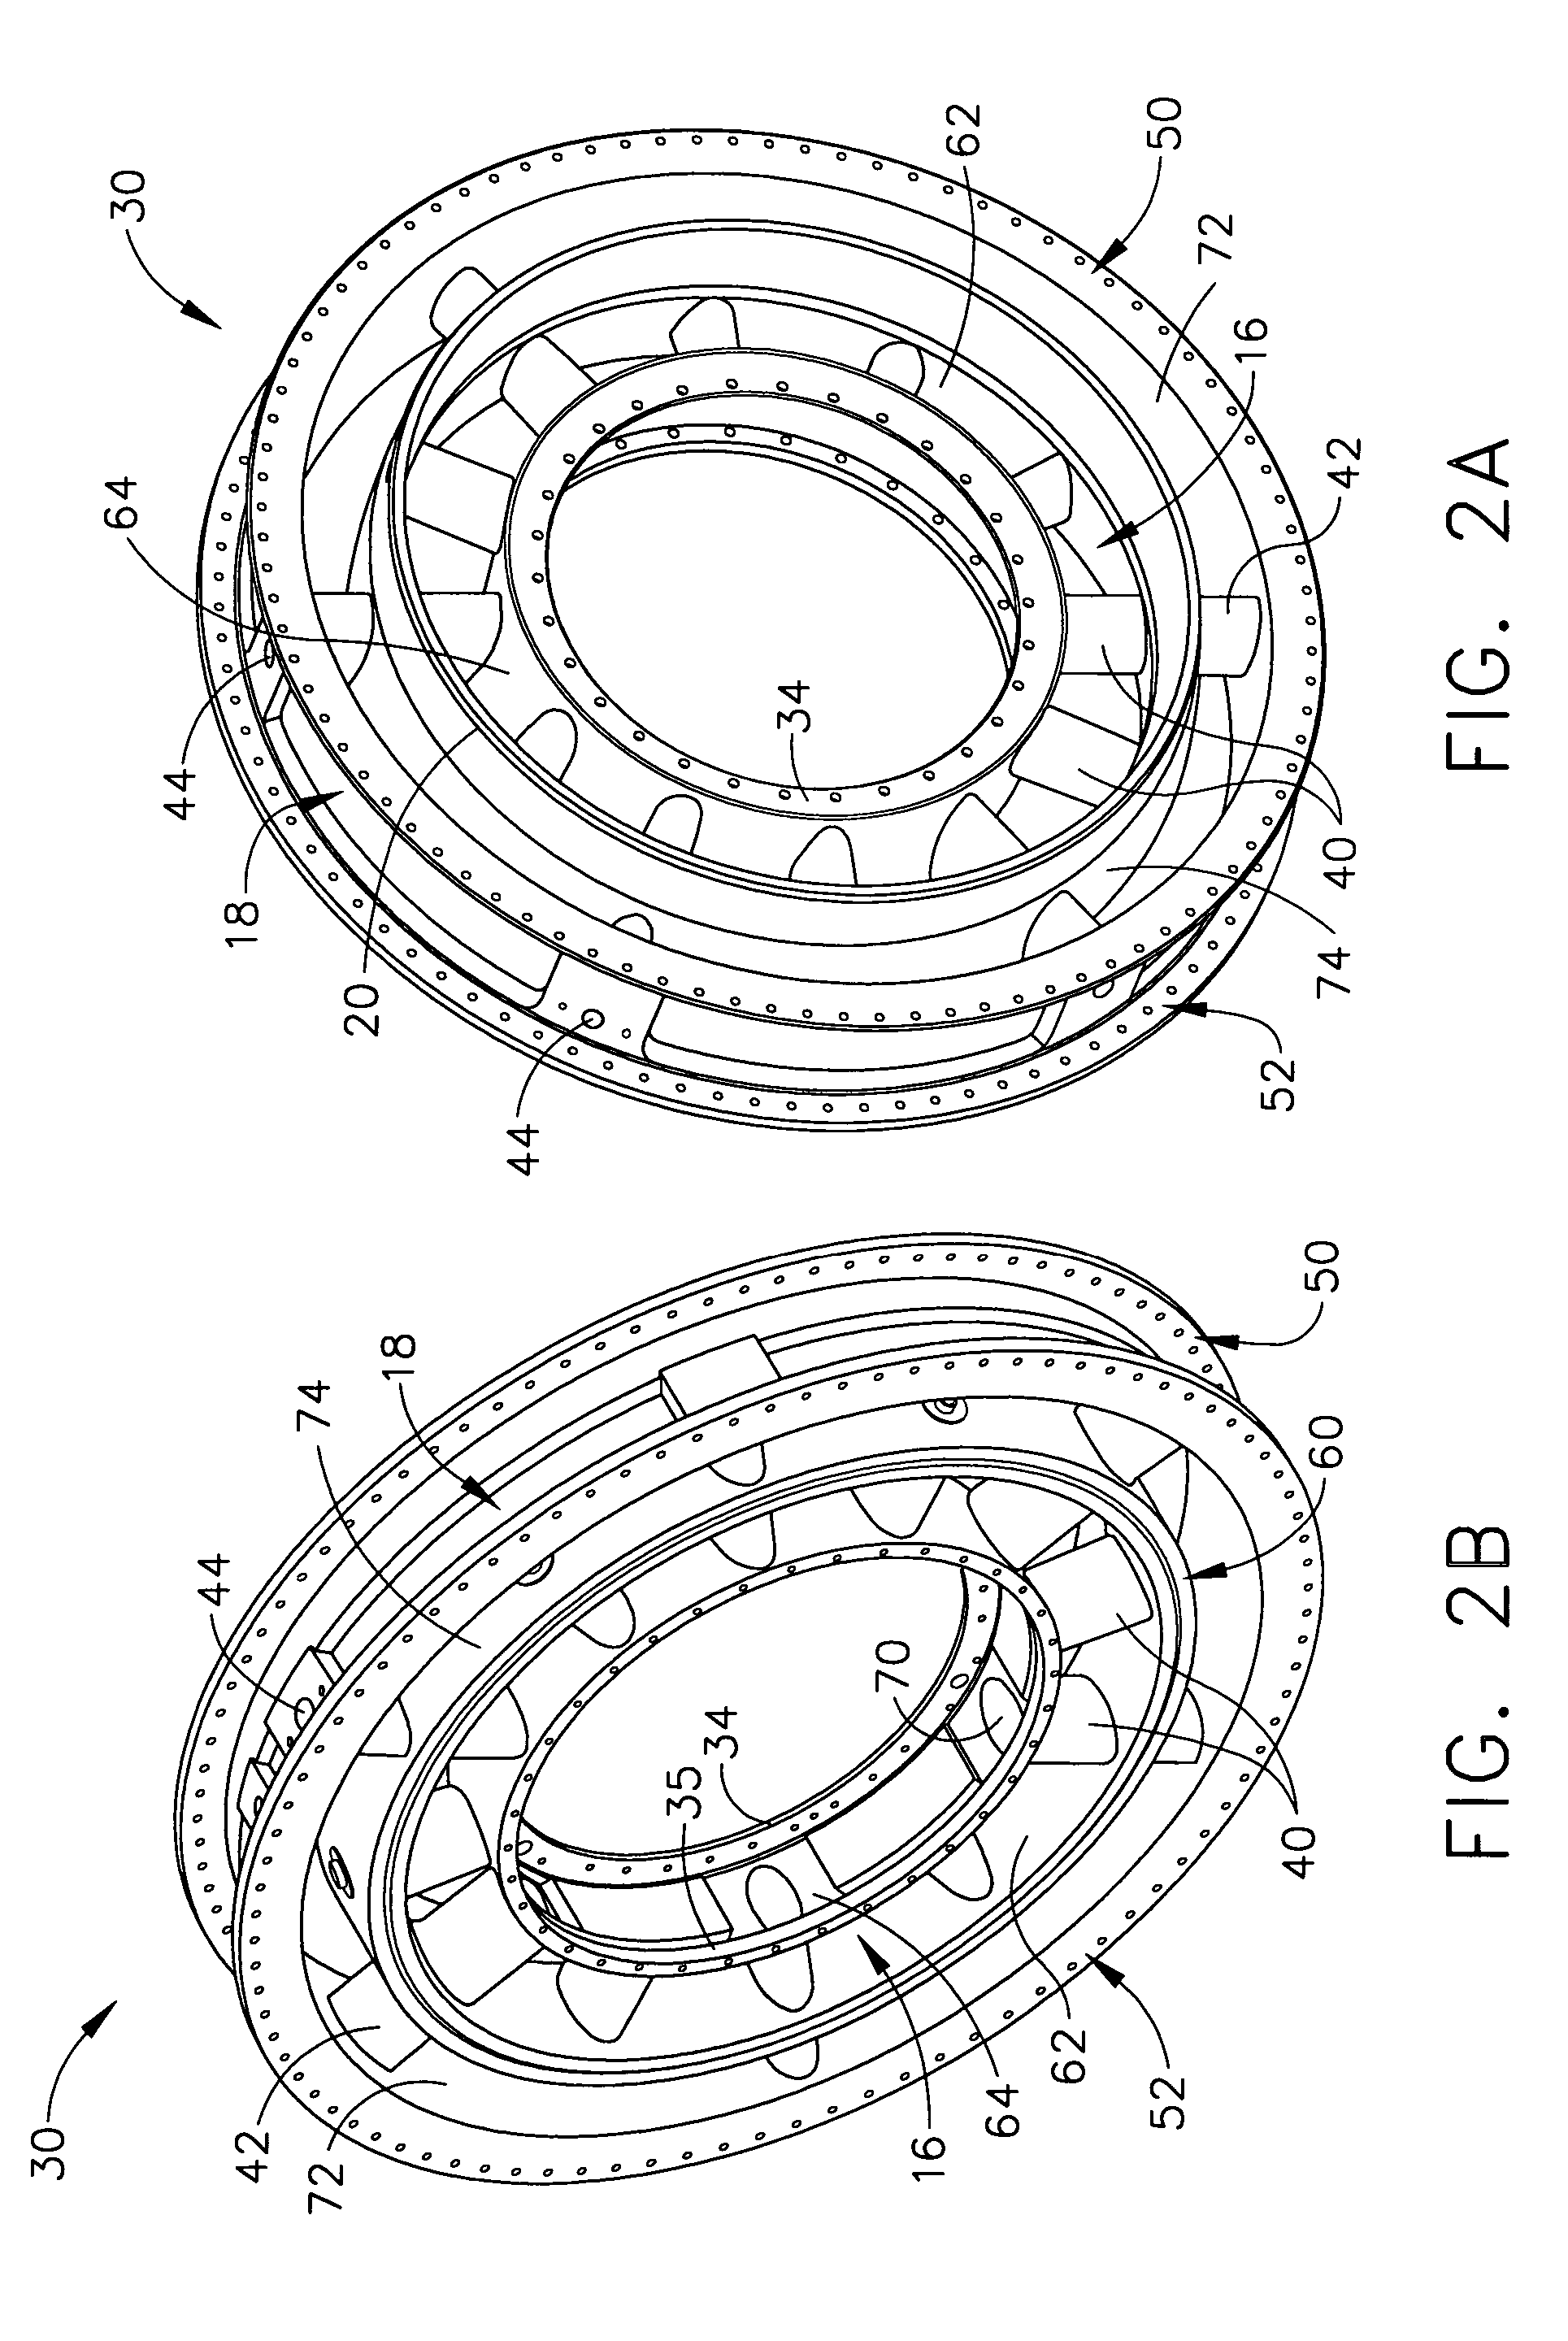 Recuperator and turbine support adapter for recuperated gas turbine engines